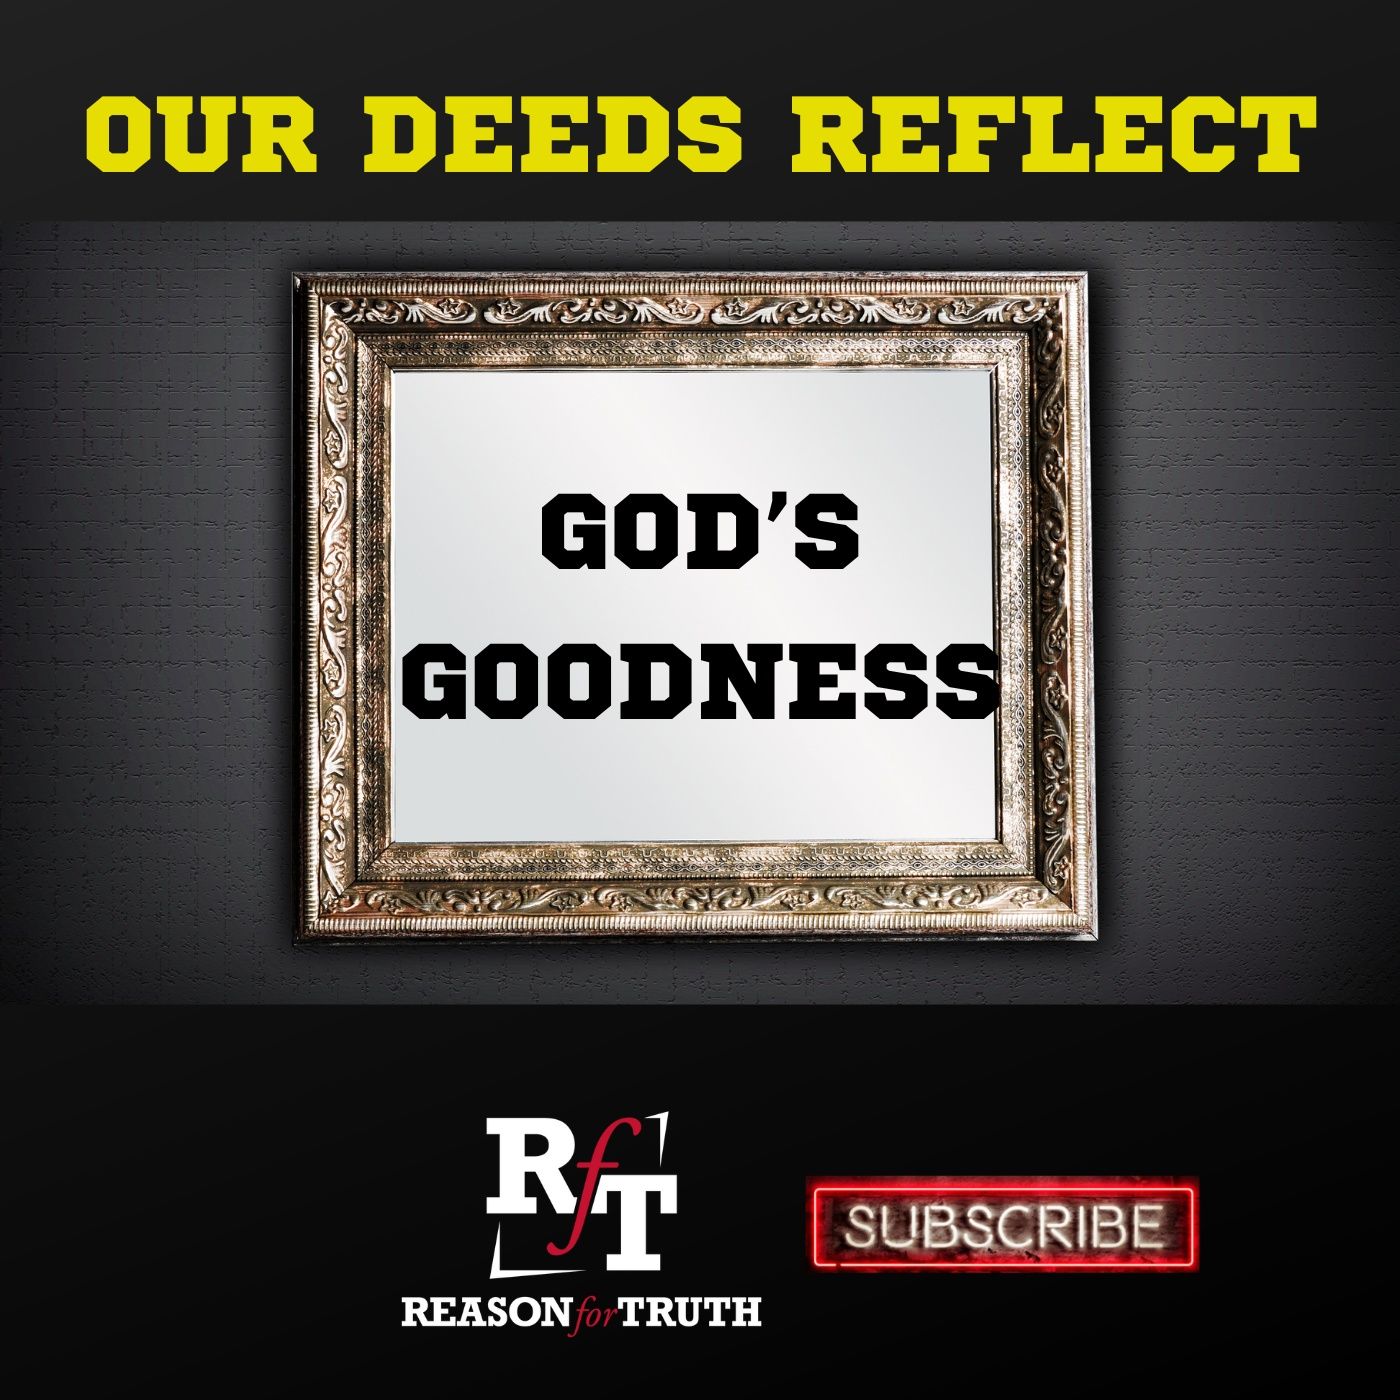 Our Deed Reflect God's Goodness - 11:21:22, 7.36 PM